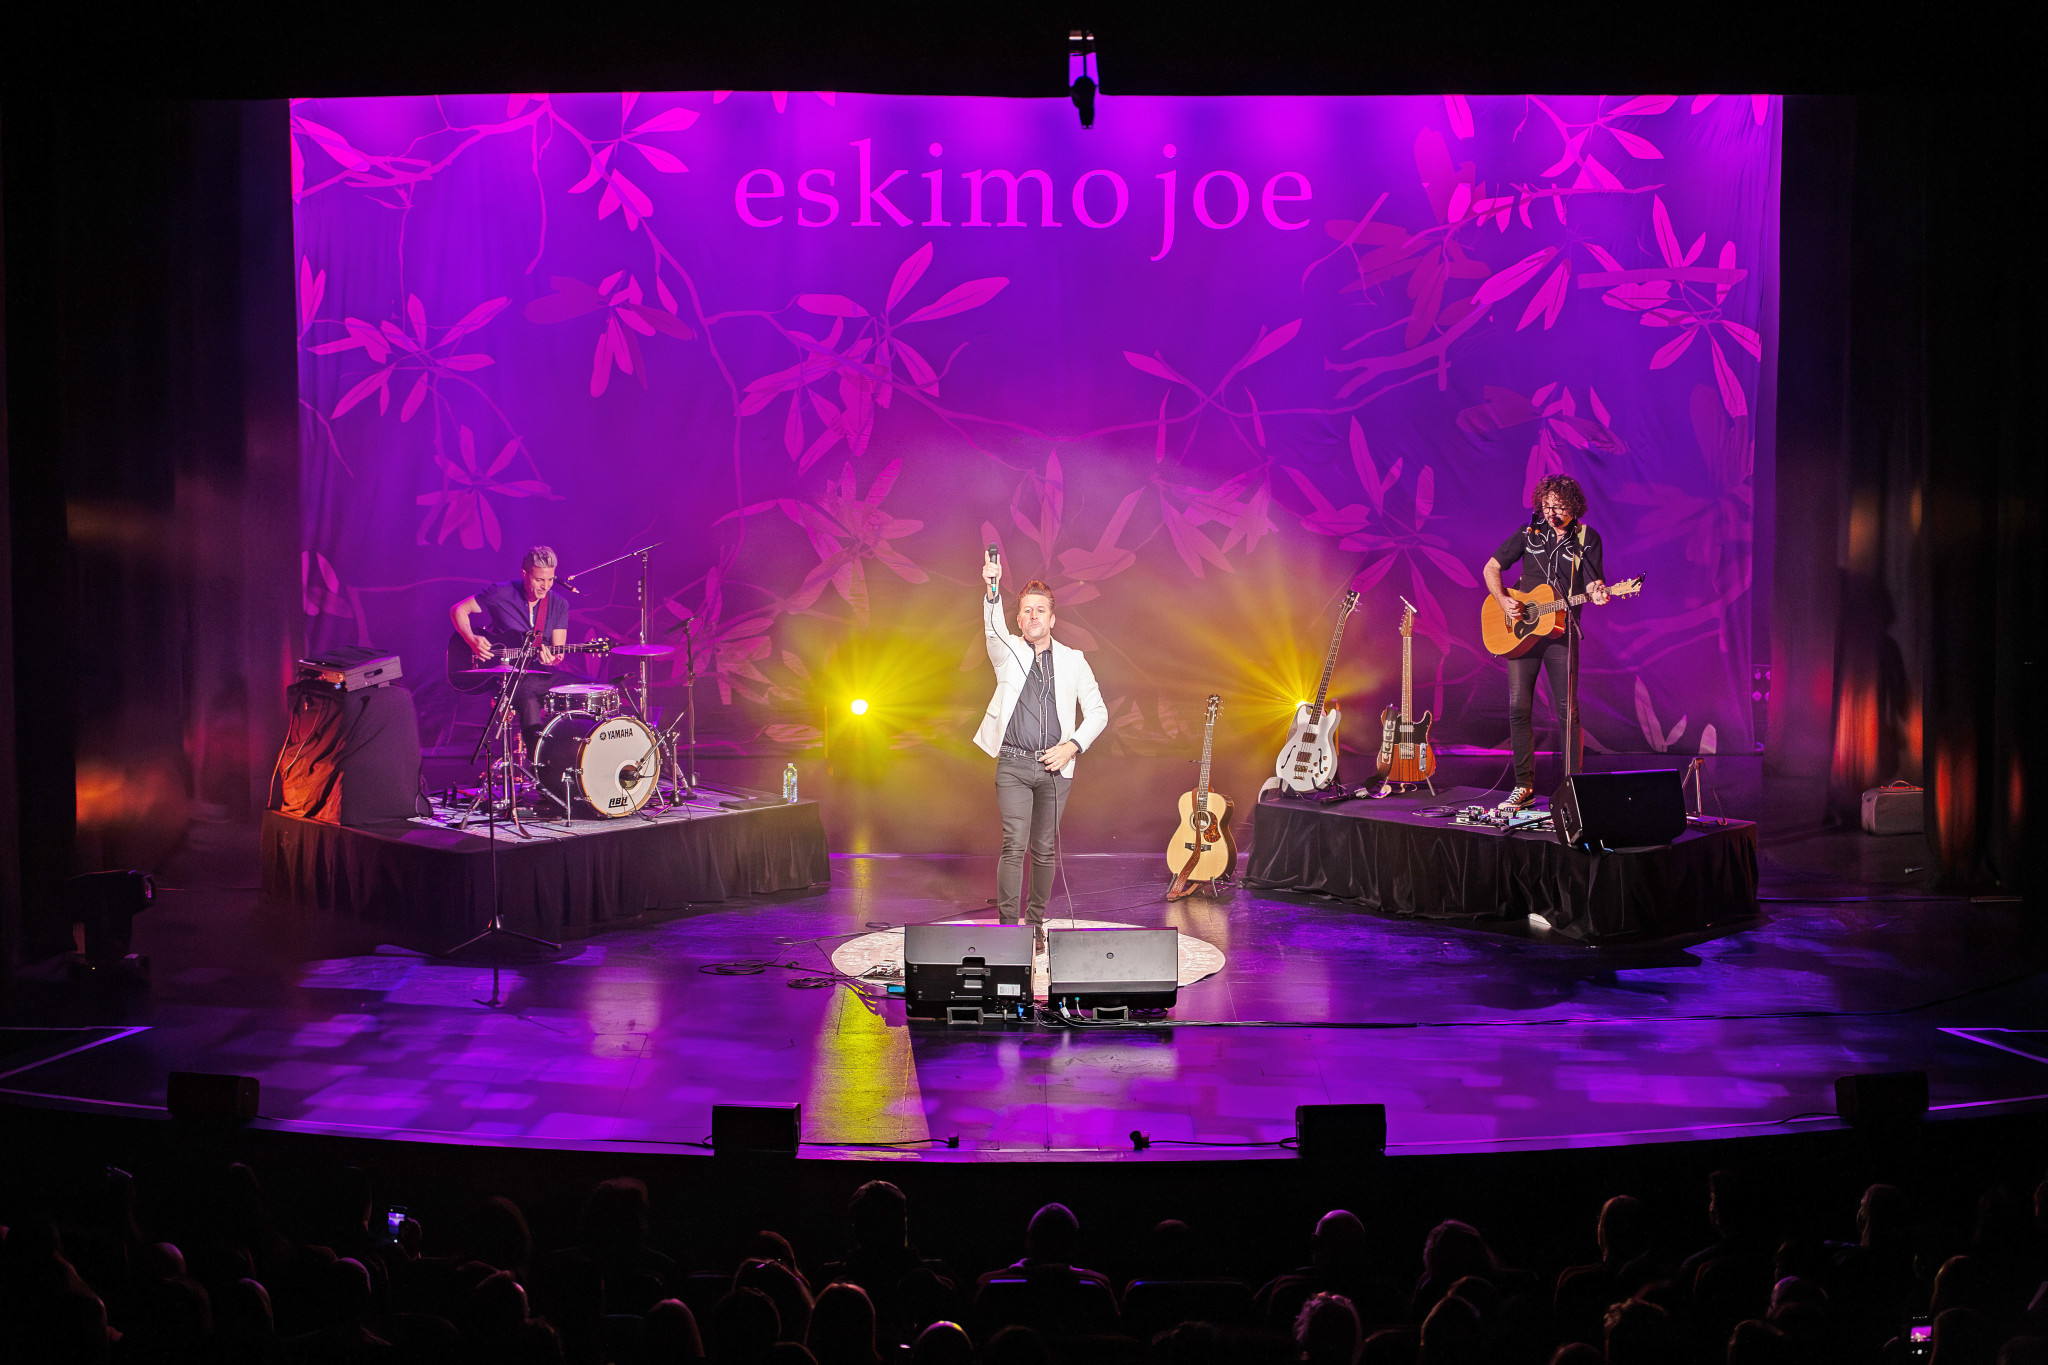 Tickets are still available for Eskimo Joe’s acoustic performance at the Mount Isa Civic Centre on Friday night.